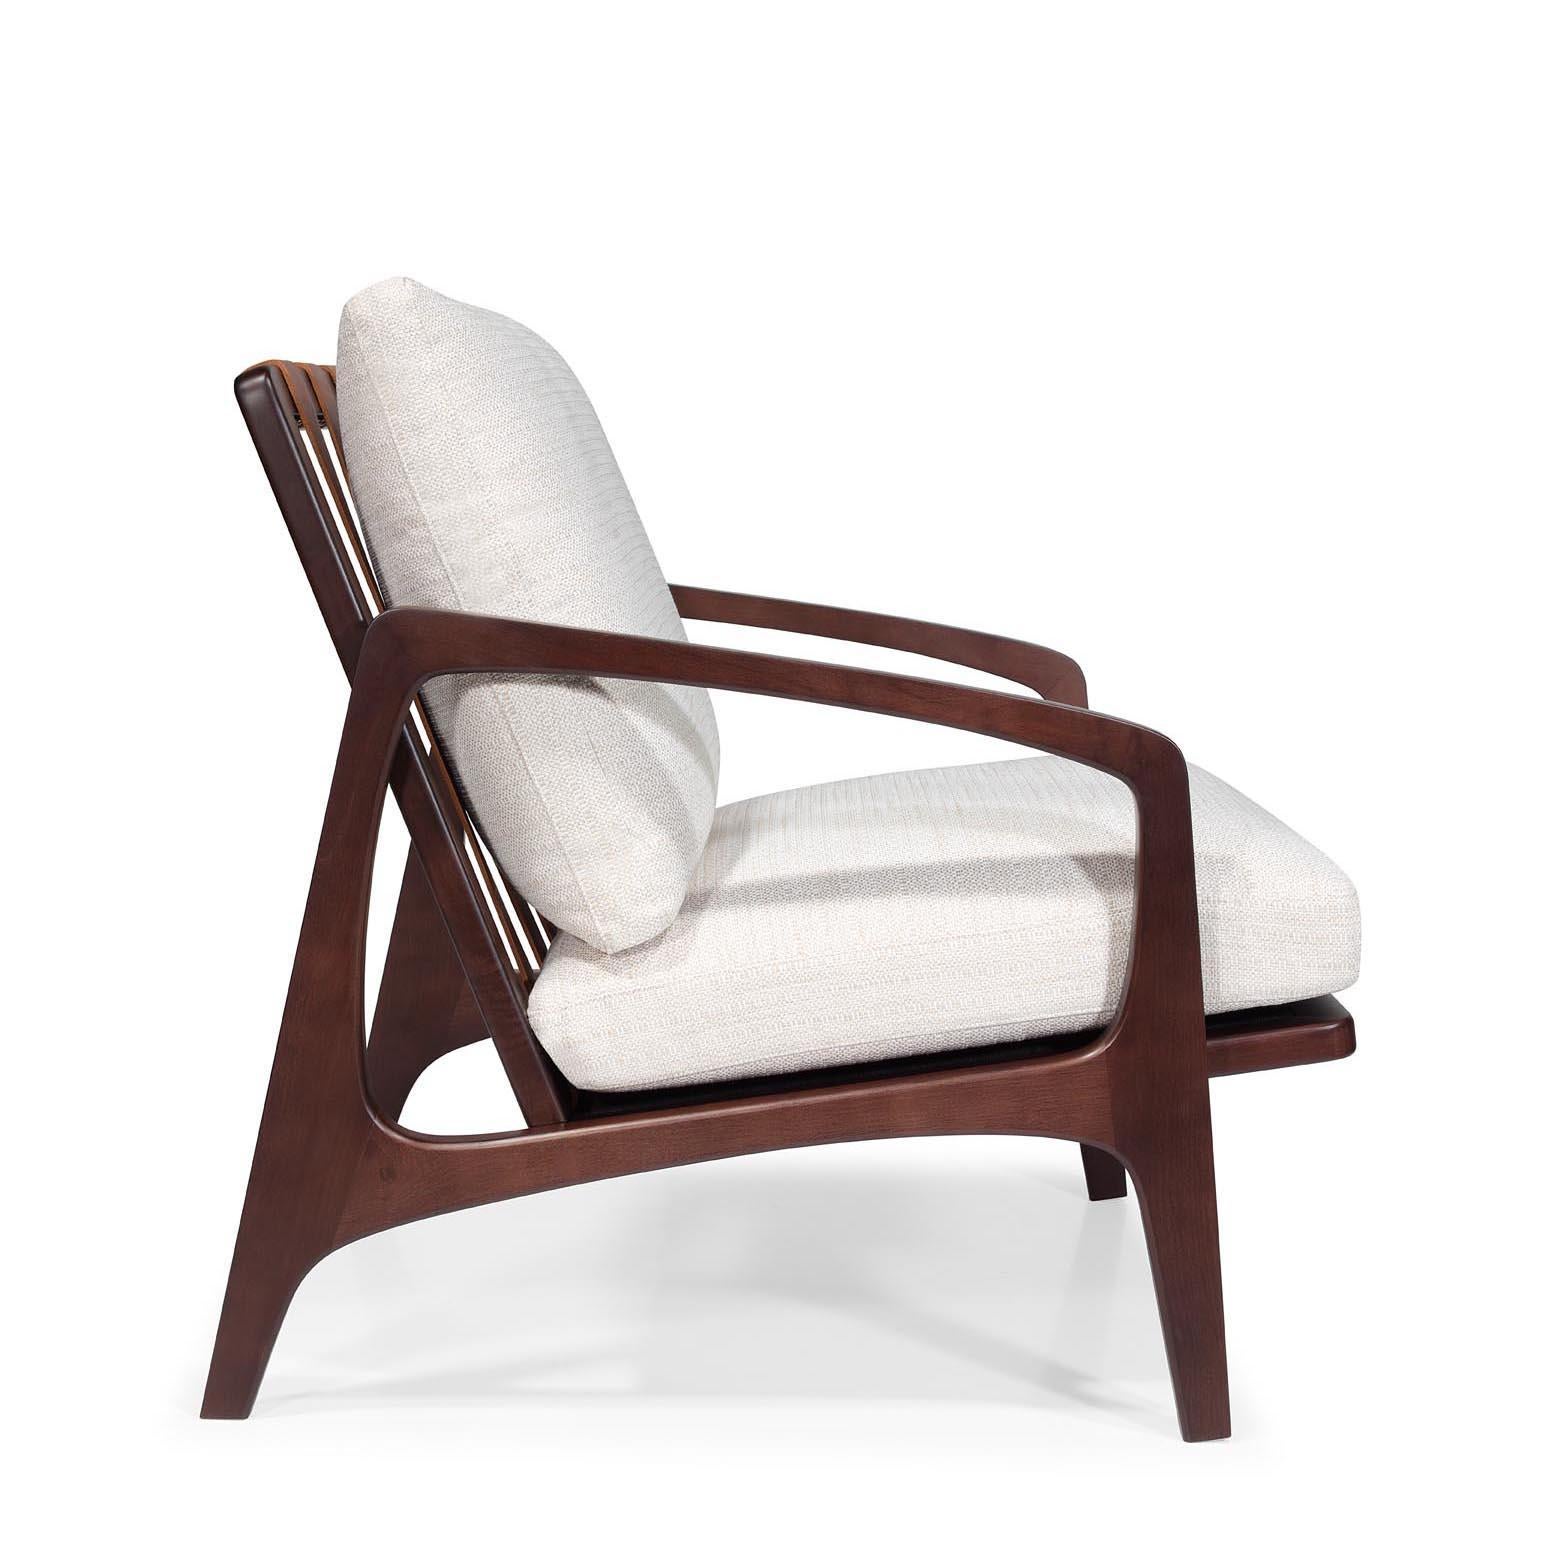 Portuguese William Lounge Chair, Walnut For Sale